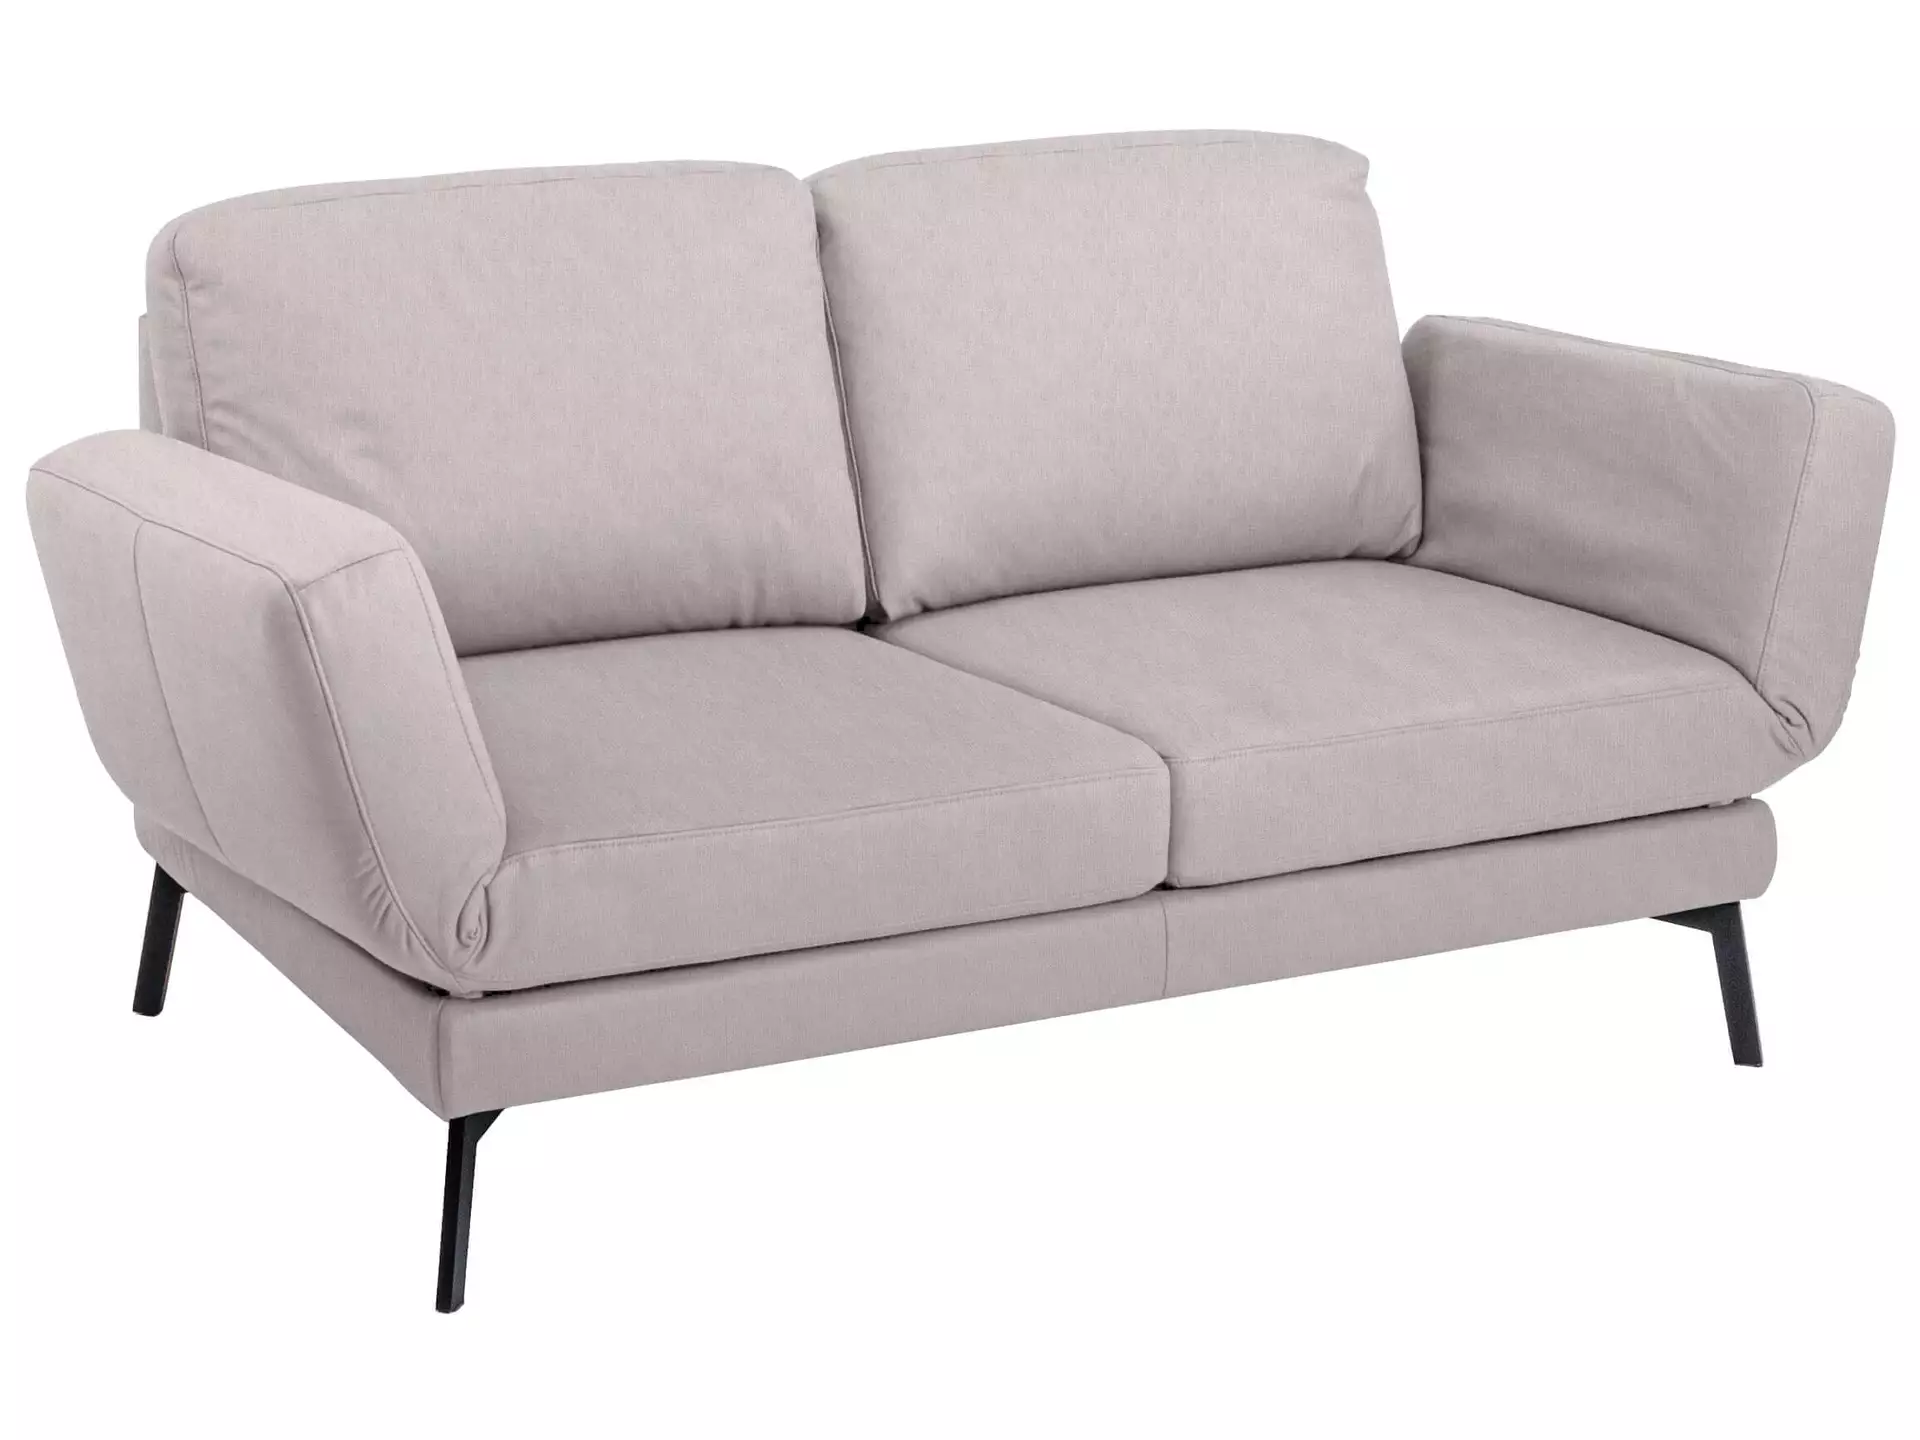 Sofa Toledo Basic Candy / Farbe: Silver / Material: Stoff Basic